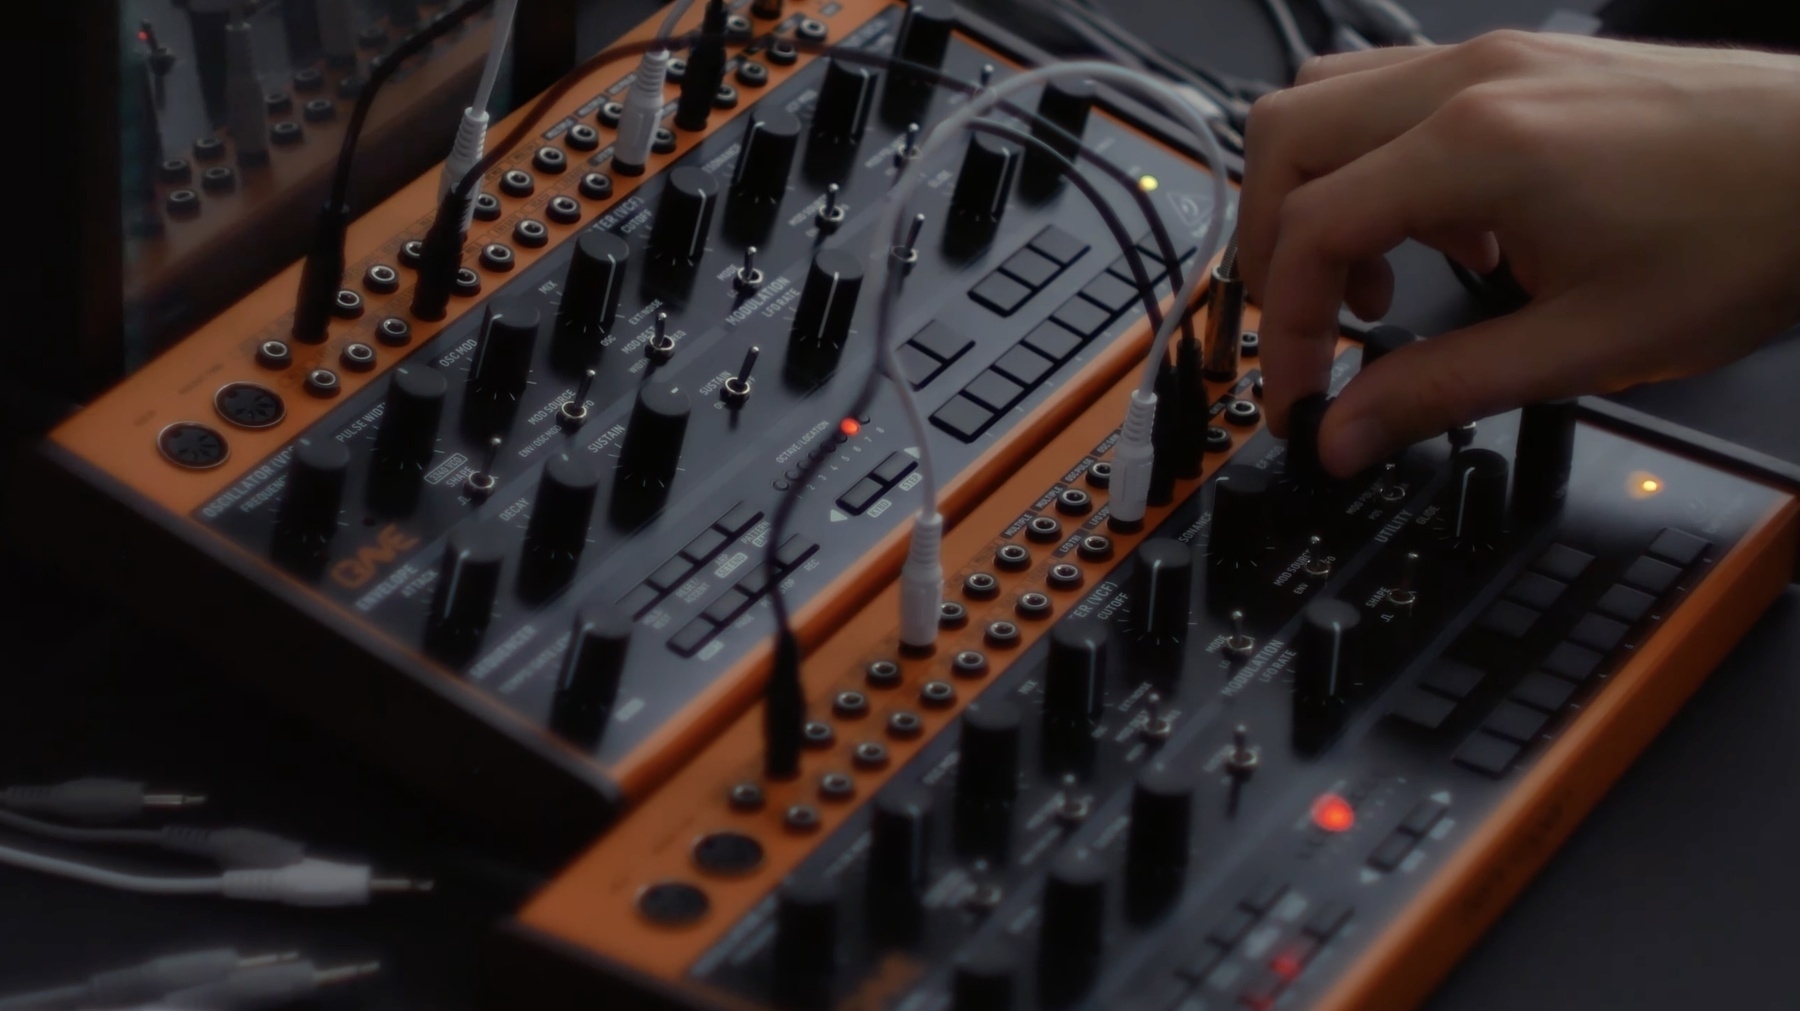 Two Behringer Crave modular synths